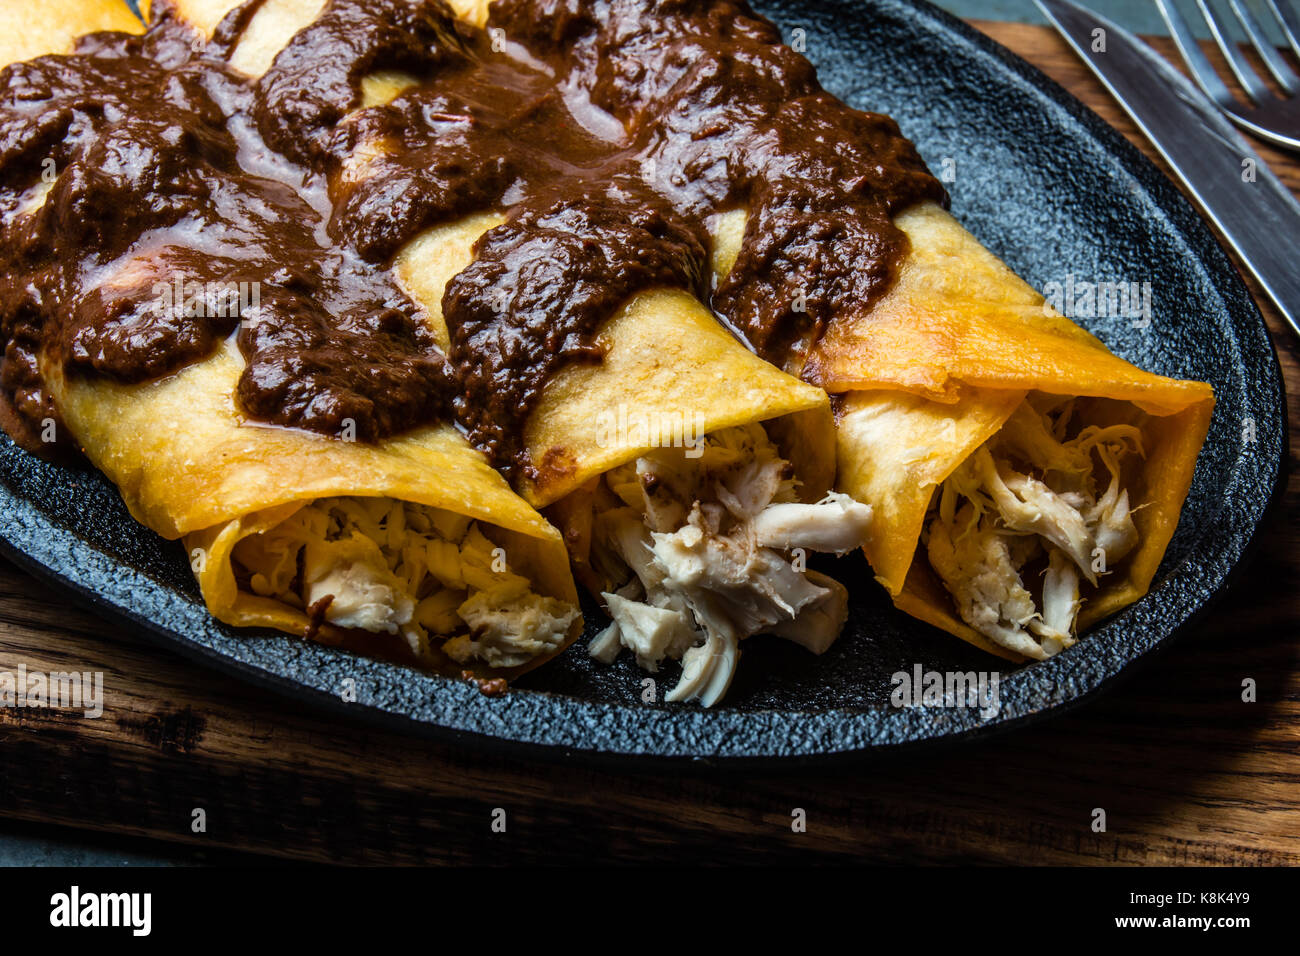 Mexican cuisine. Traditional Mexican chicken enchiladas with spicy chocolate salsa mole poblano. Enchiladas with sauce moole from Puebla, Mexico. Stock Photo